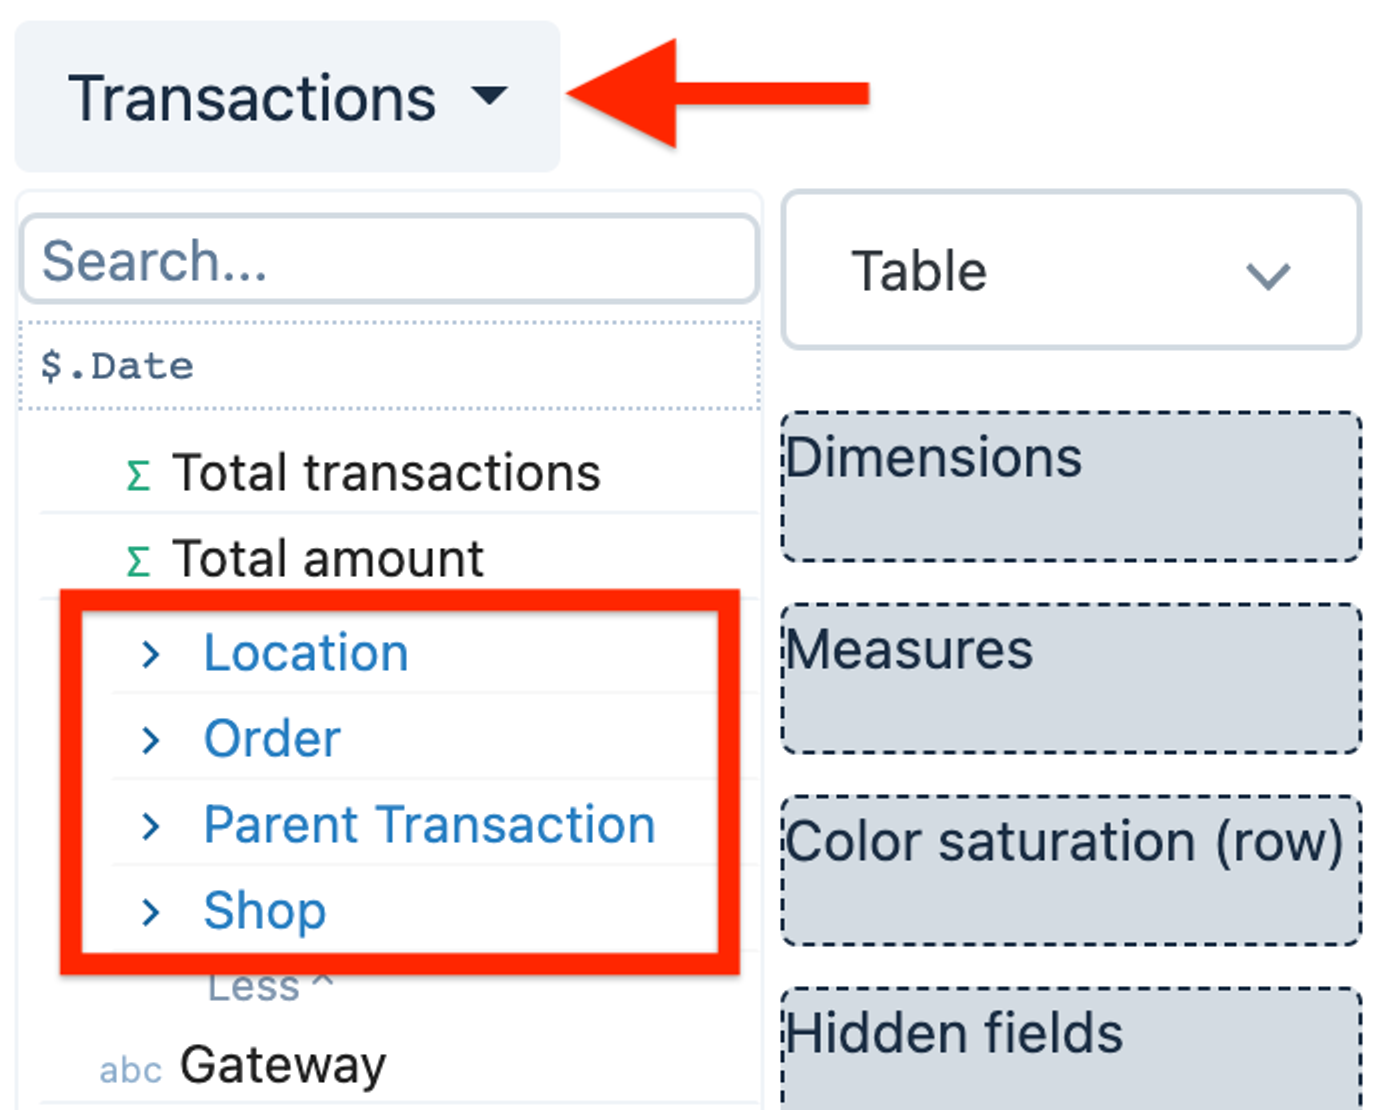 Related entities of the Transactions table